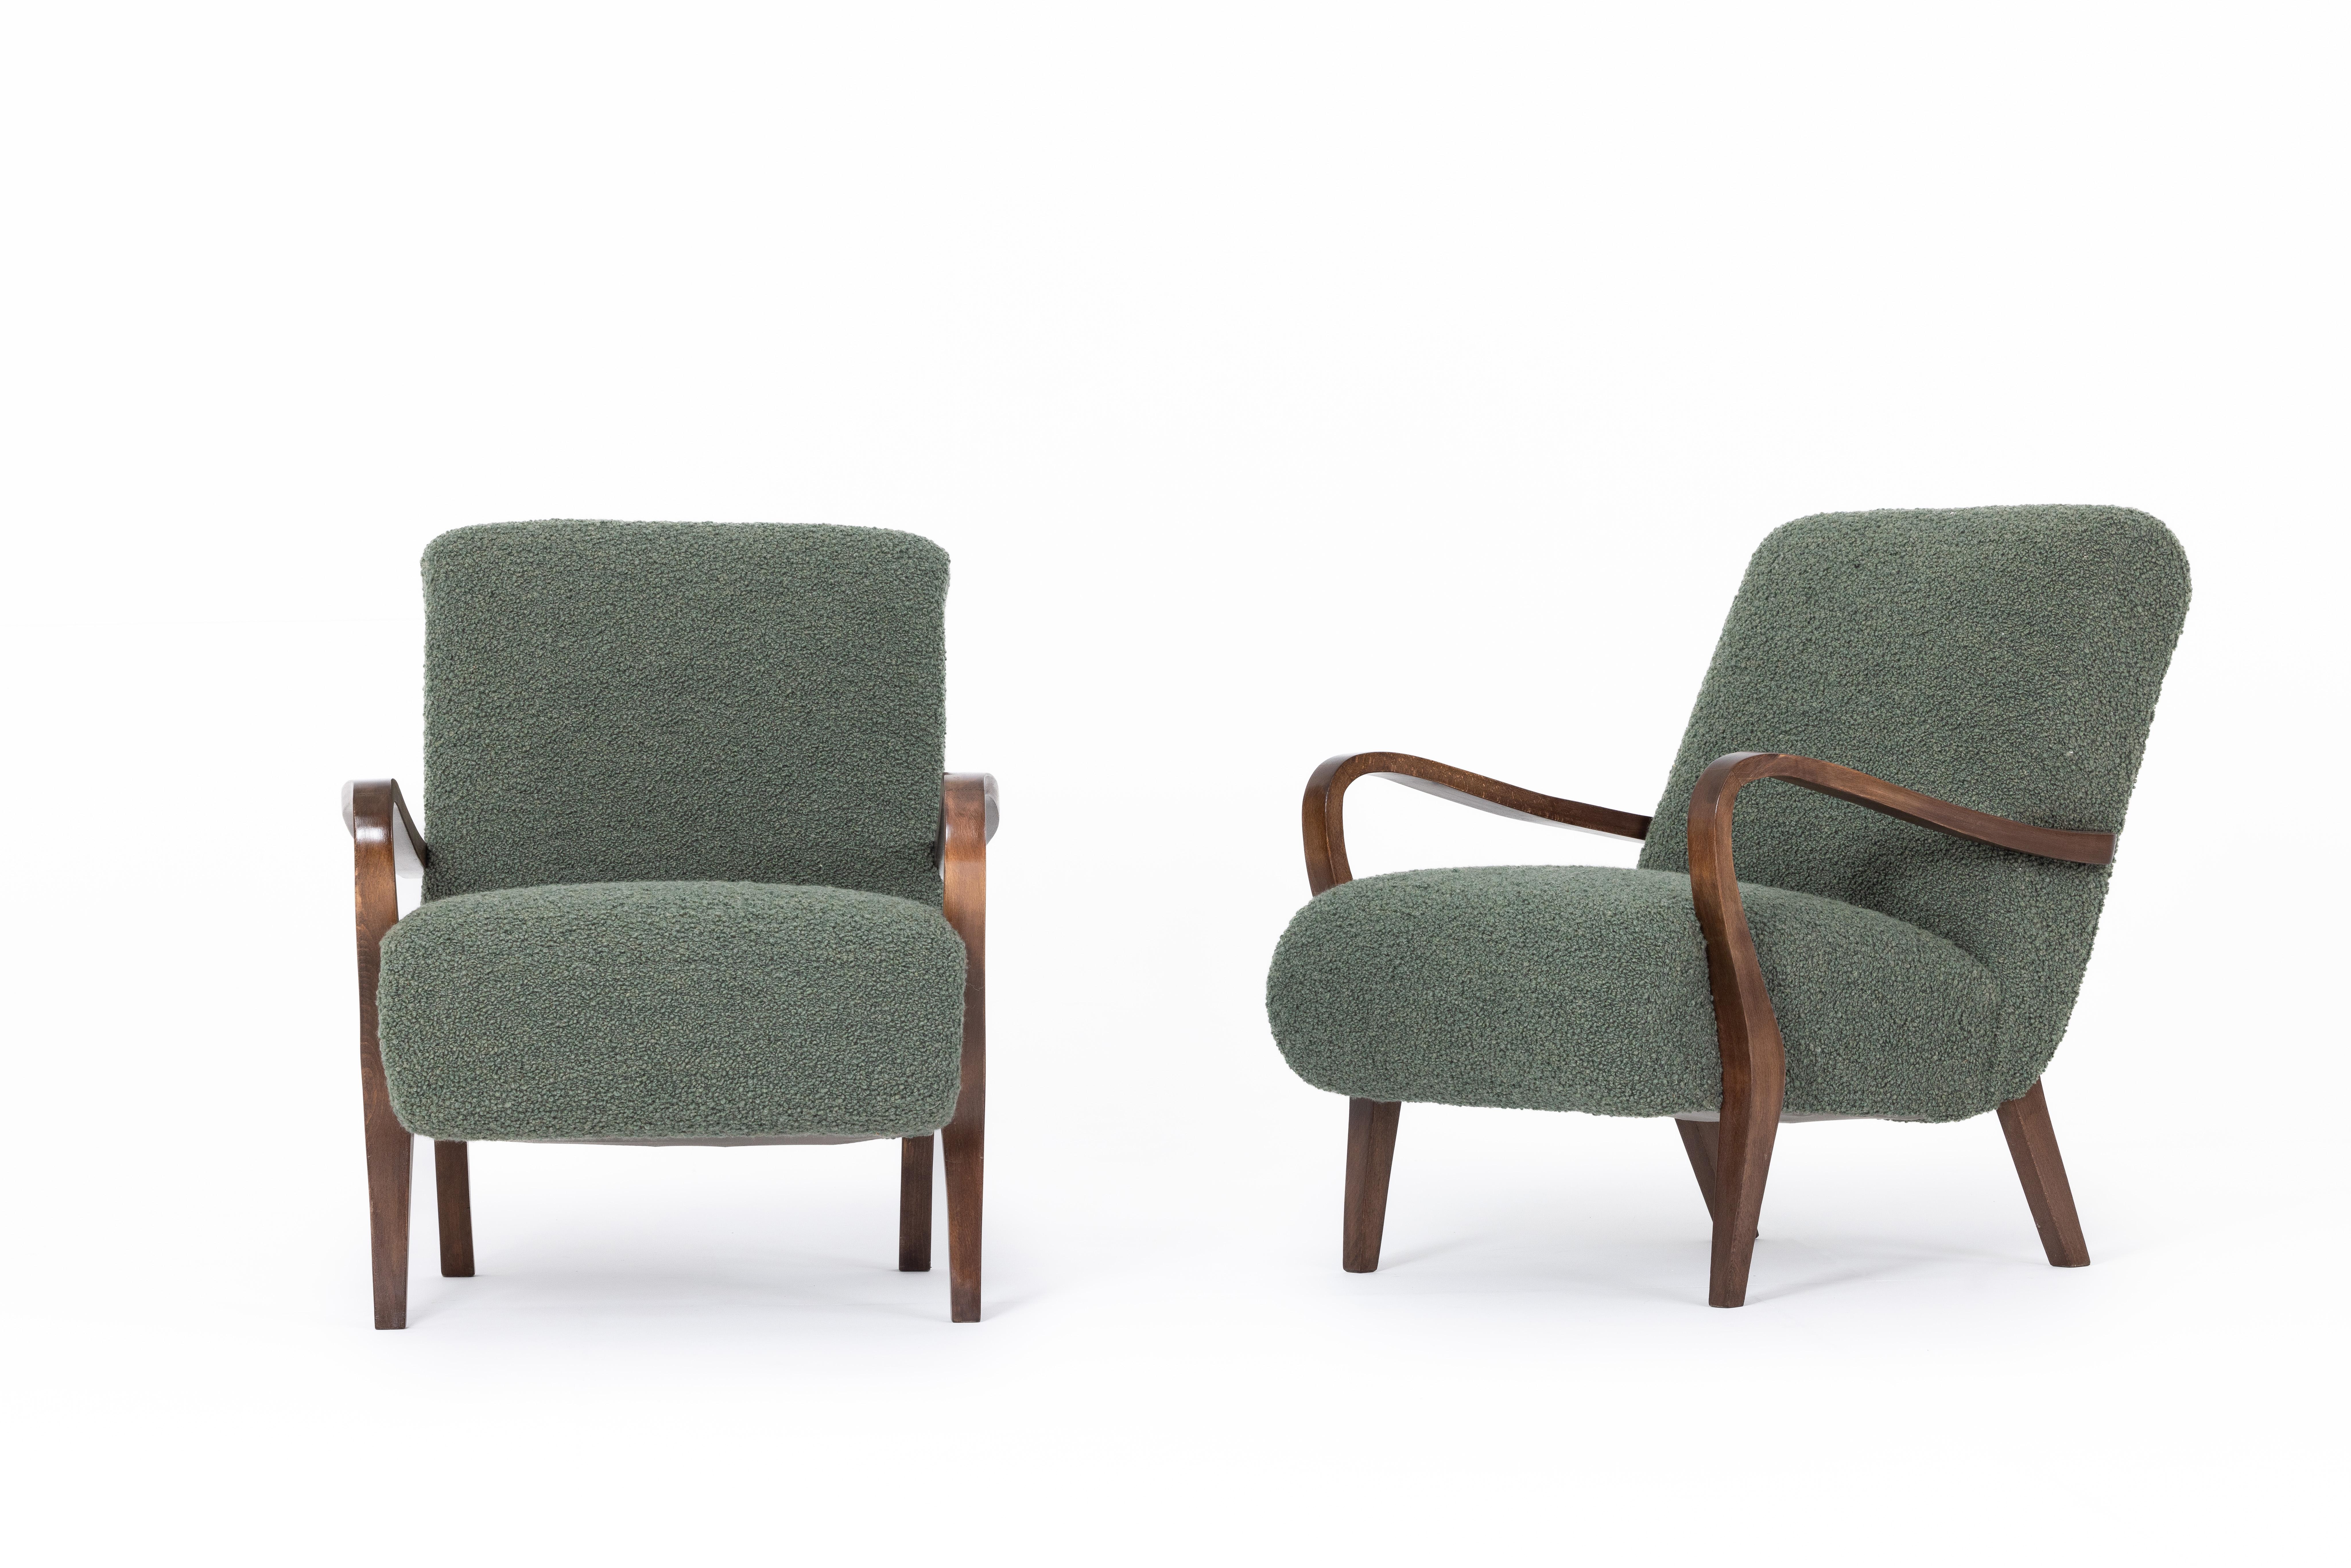 Pair of art deco armchairs, France 1920s, Dedar fabric In Excellent Condition For Sale In Torino, Piemonte